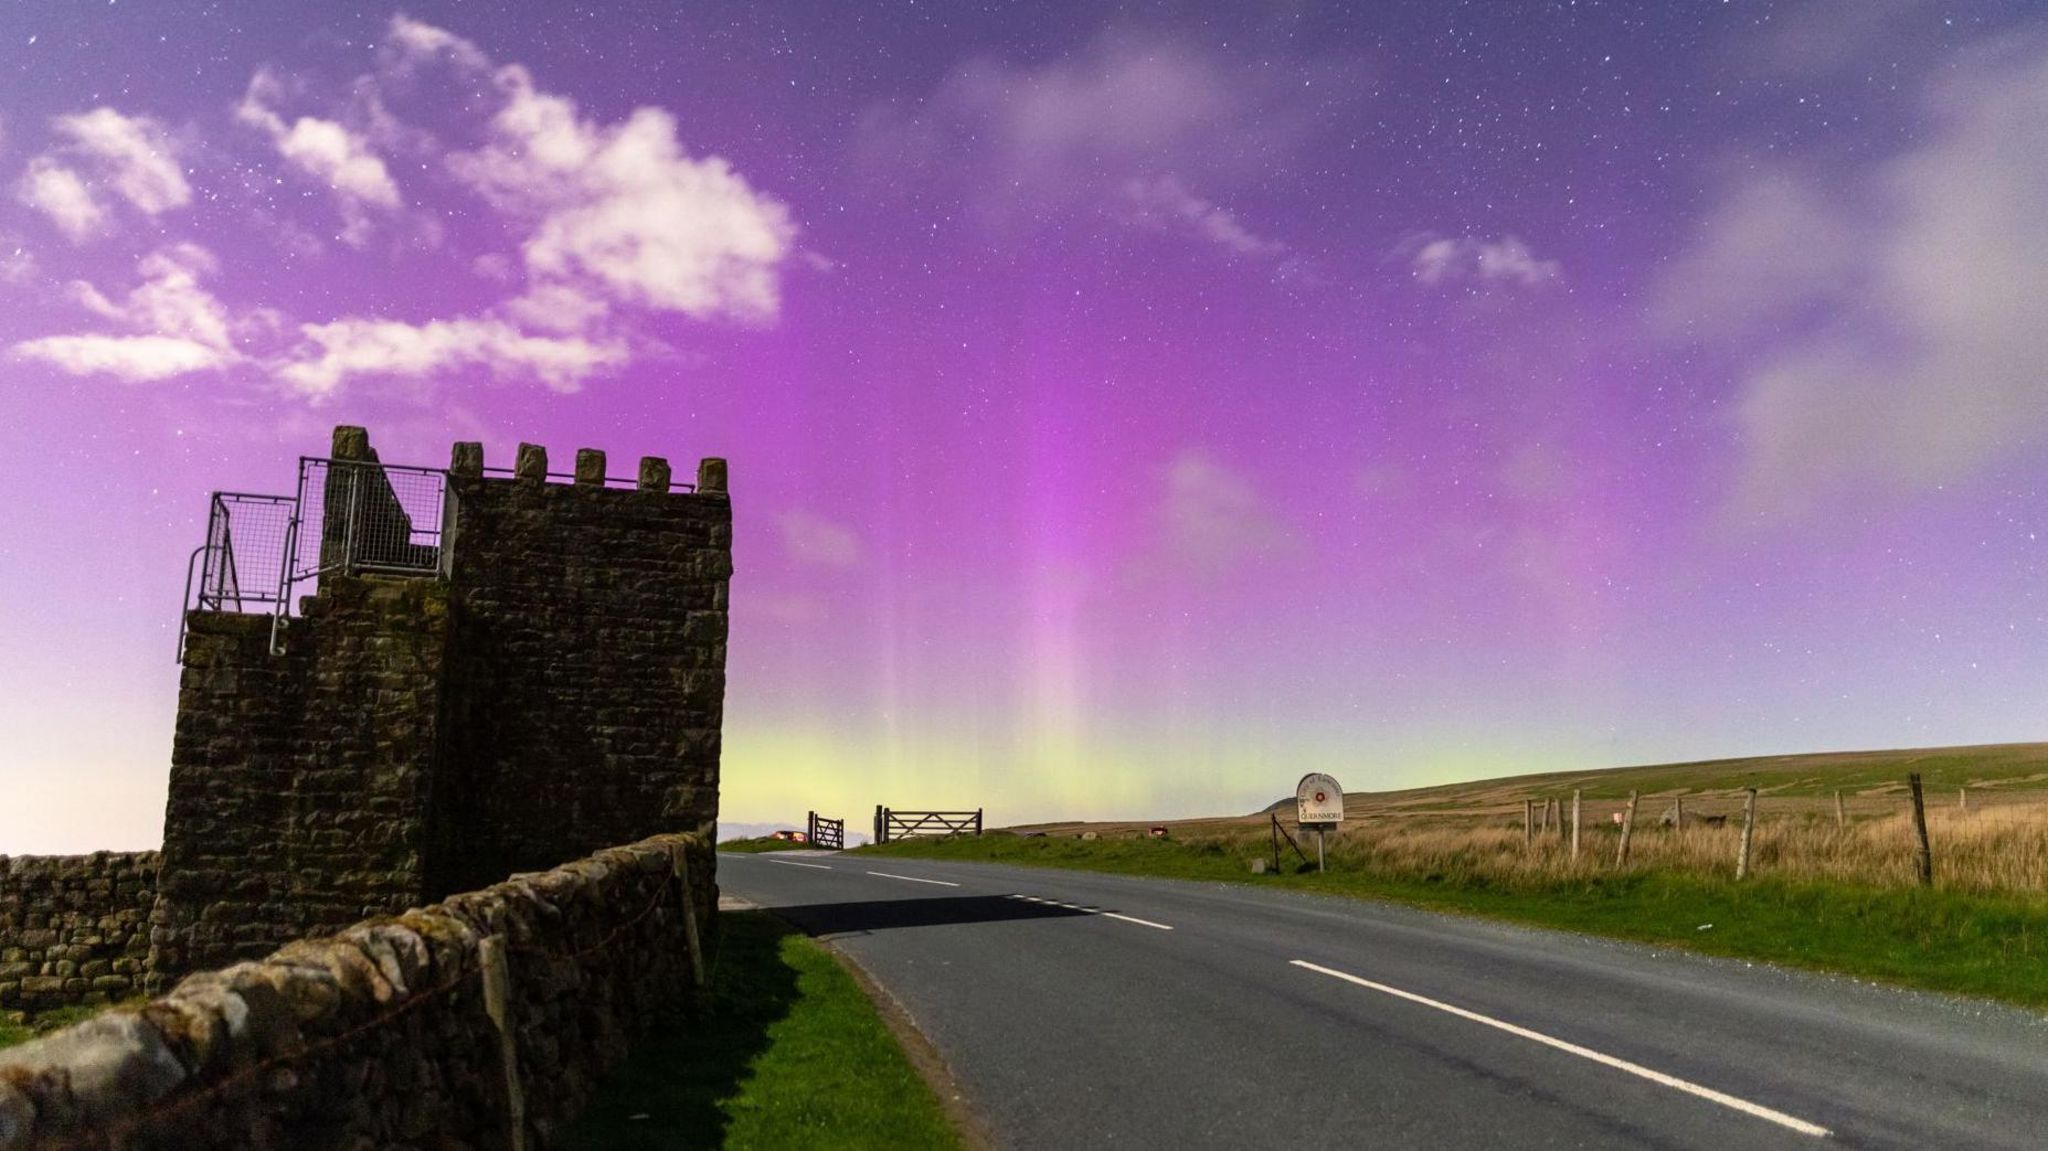 The Northern Lights on display near Lancaster